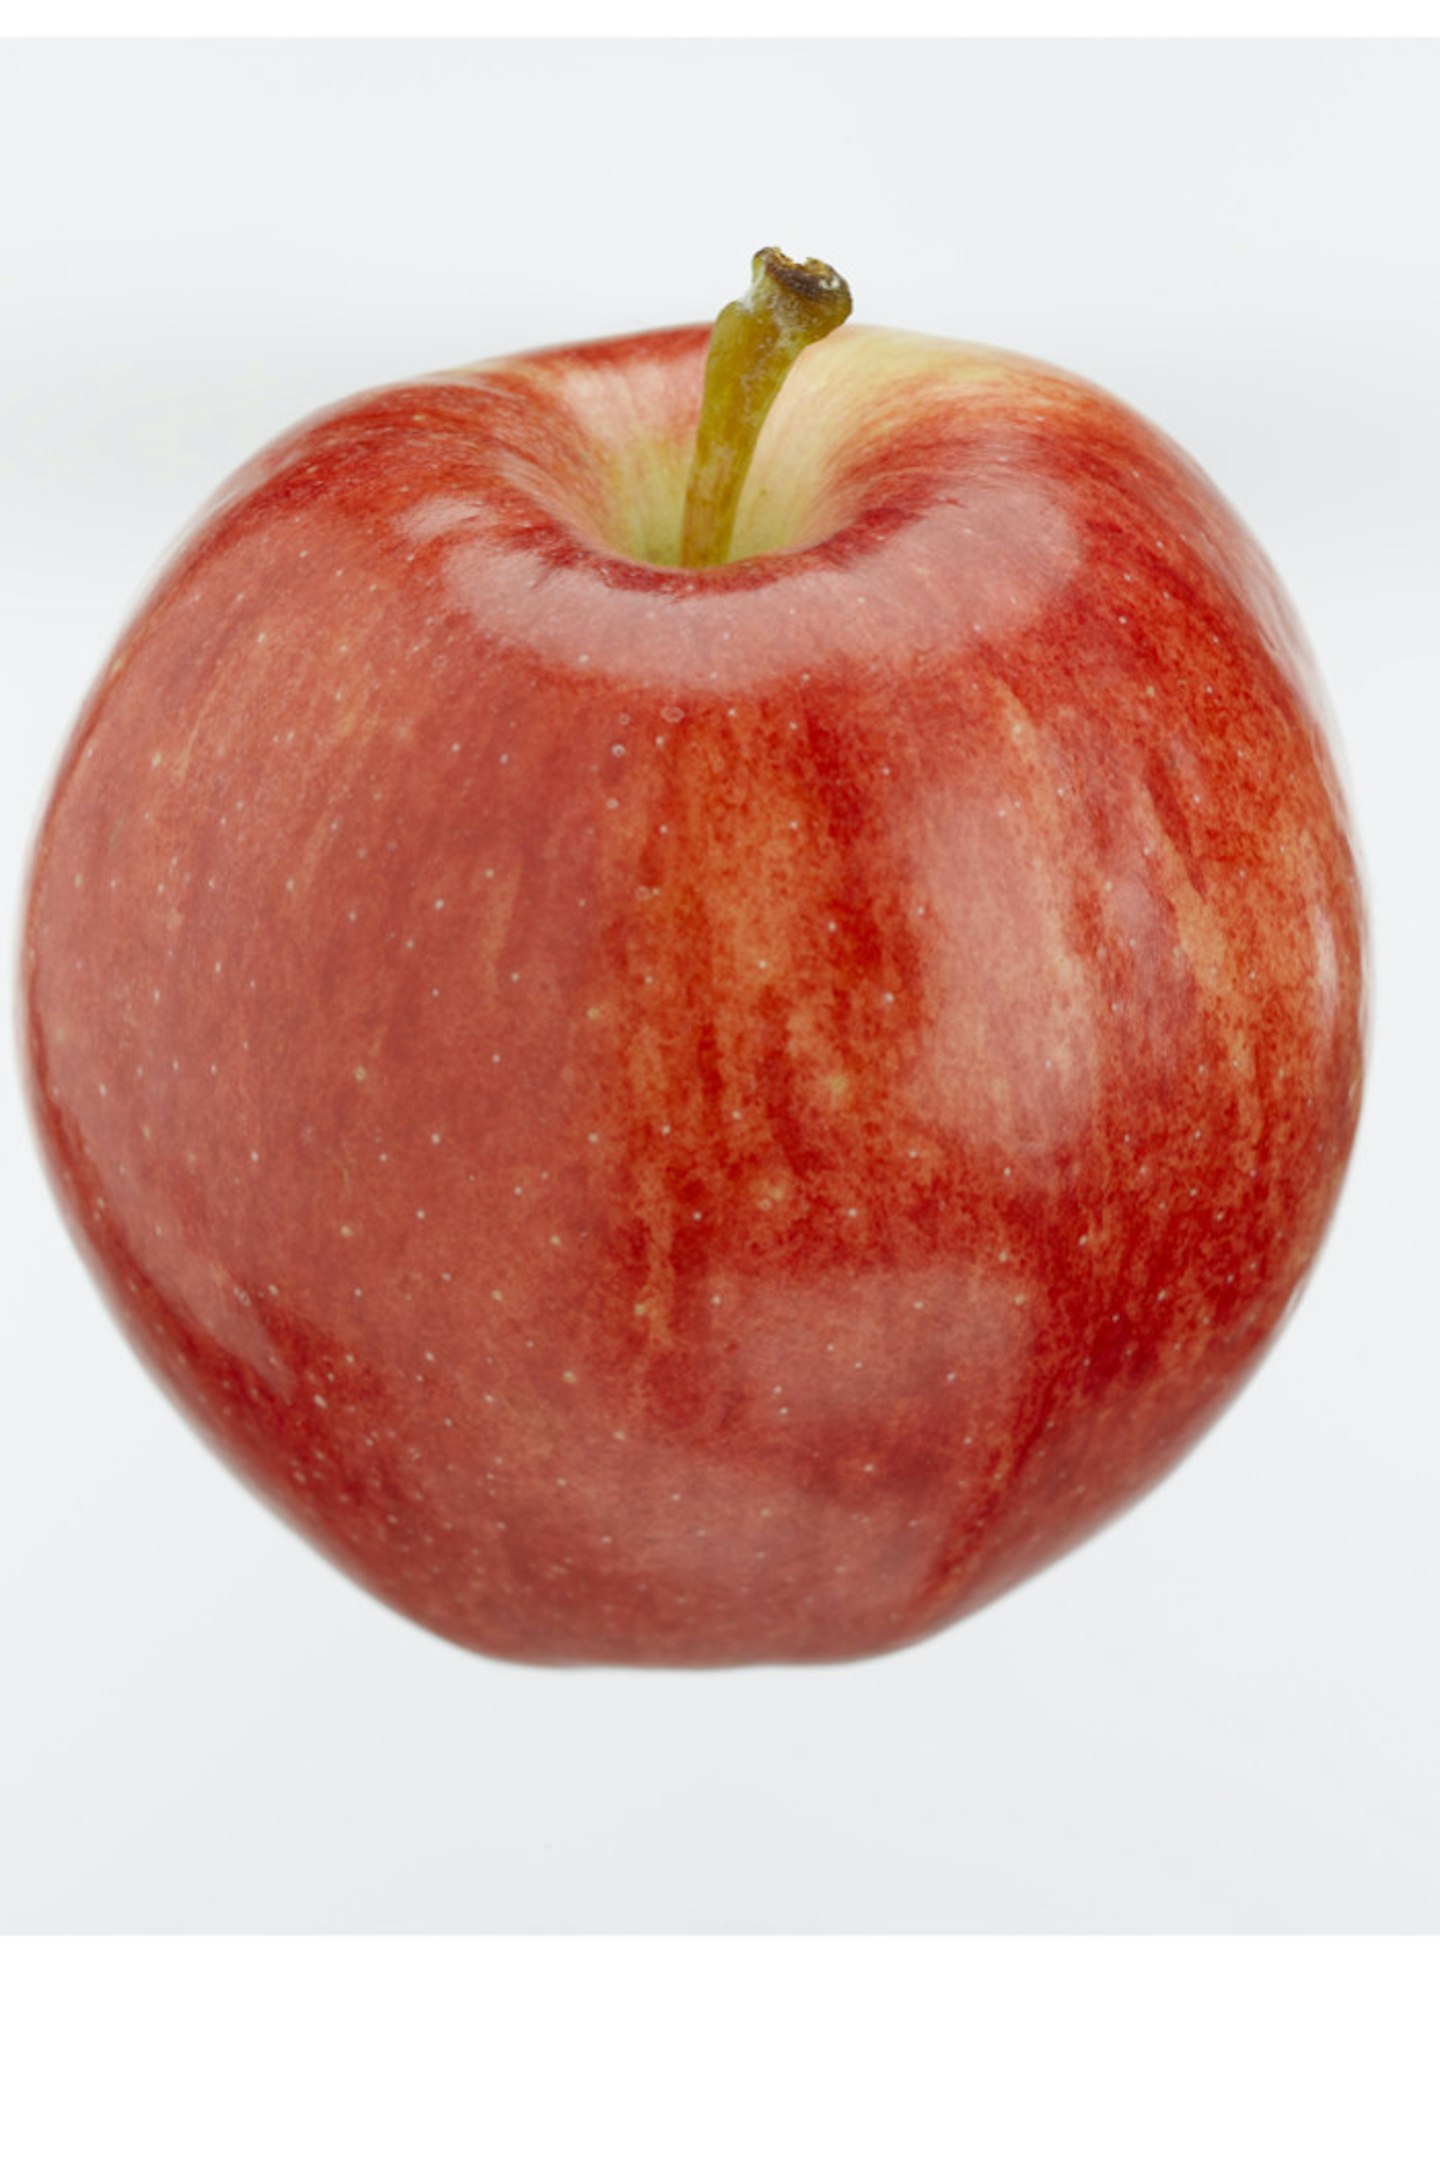 A red apple!